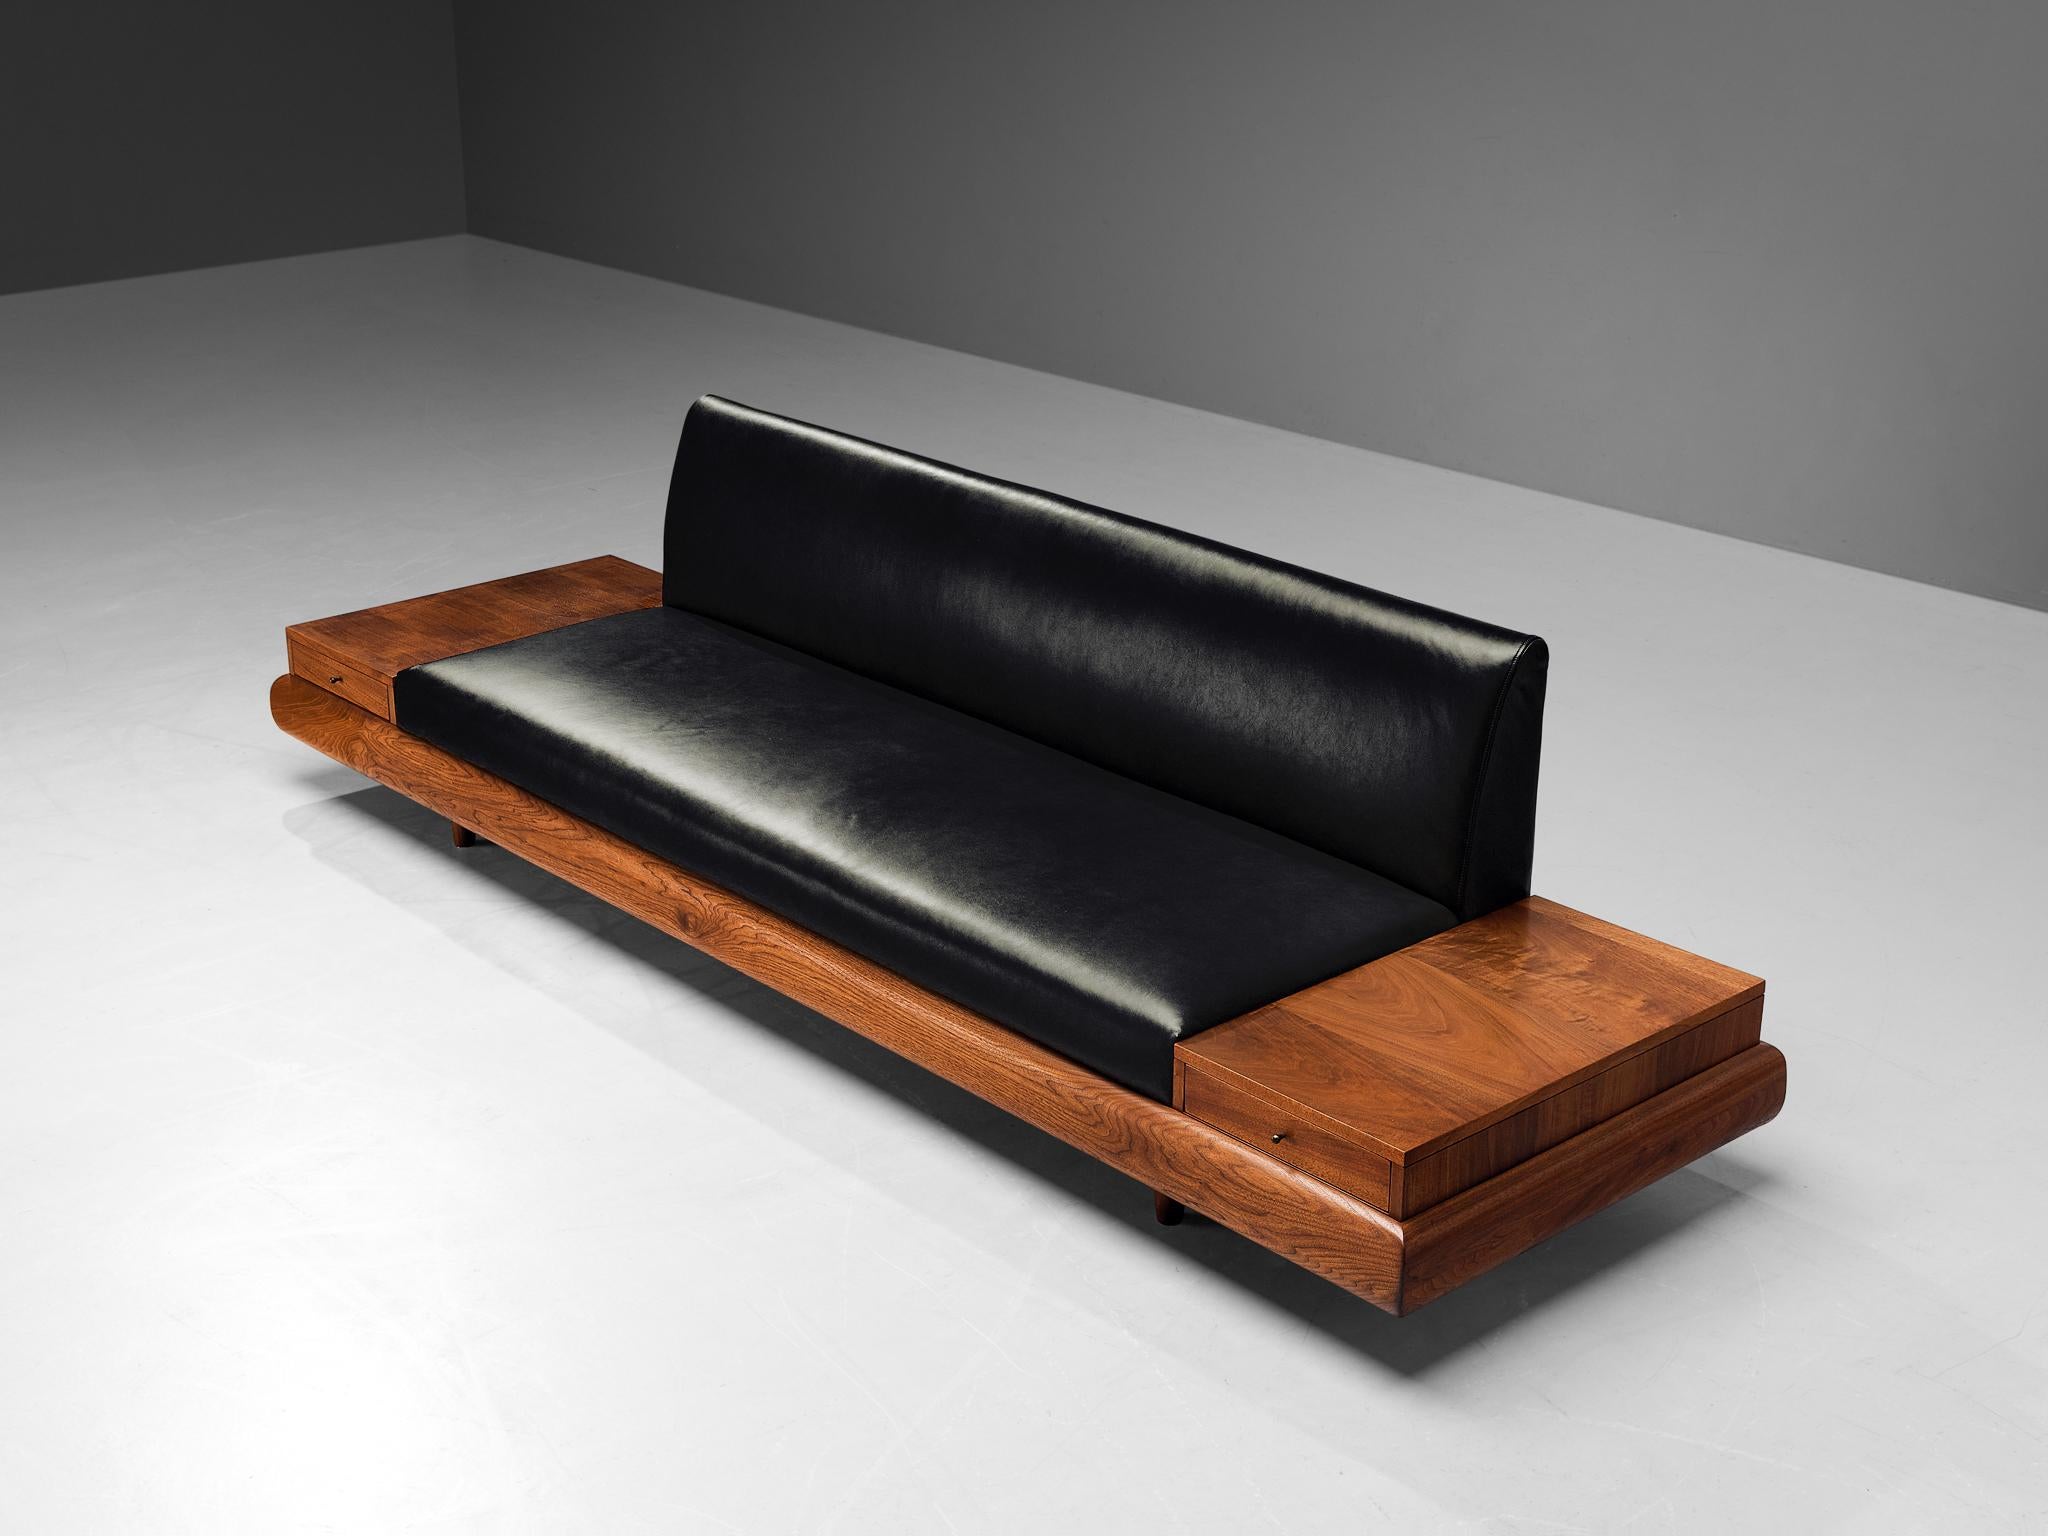 Adrian Pearsall, 'Platform' sofa with two drawers, model 1709-S, leather upholstery, walnut, United States, 1960s

Adrian Pearsall is known for his rather unique sofa designs. The '1709-S' is no exception. On a low base of a thick walnut frame rests